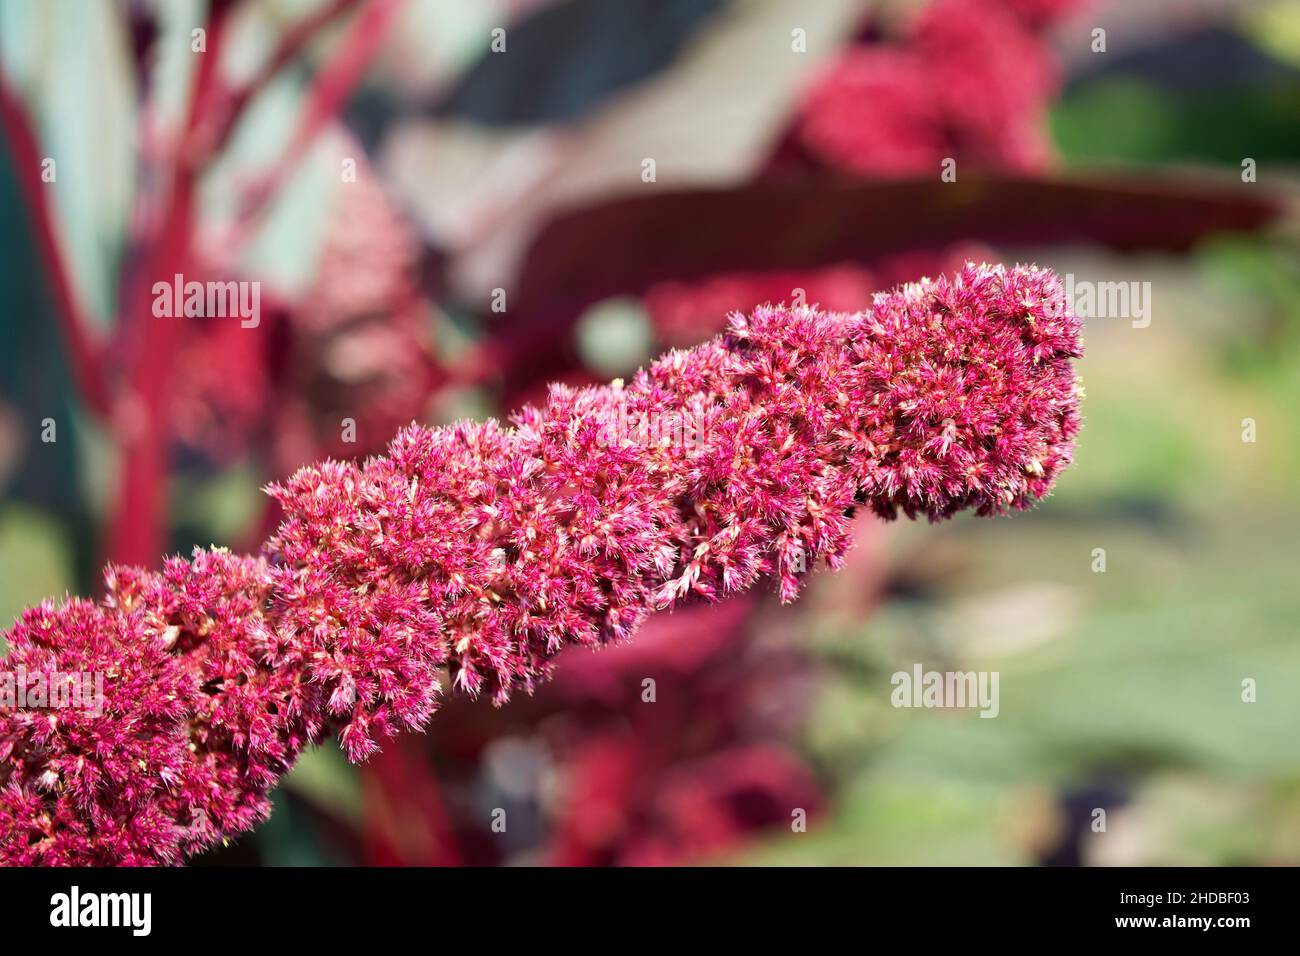 A bunch of flowering amaranth plant, red inflorescence. Amaranth close-up. Stock Photo